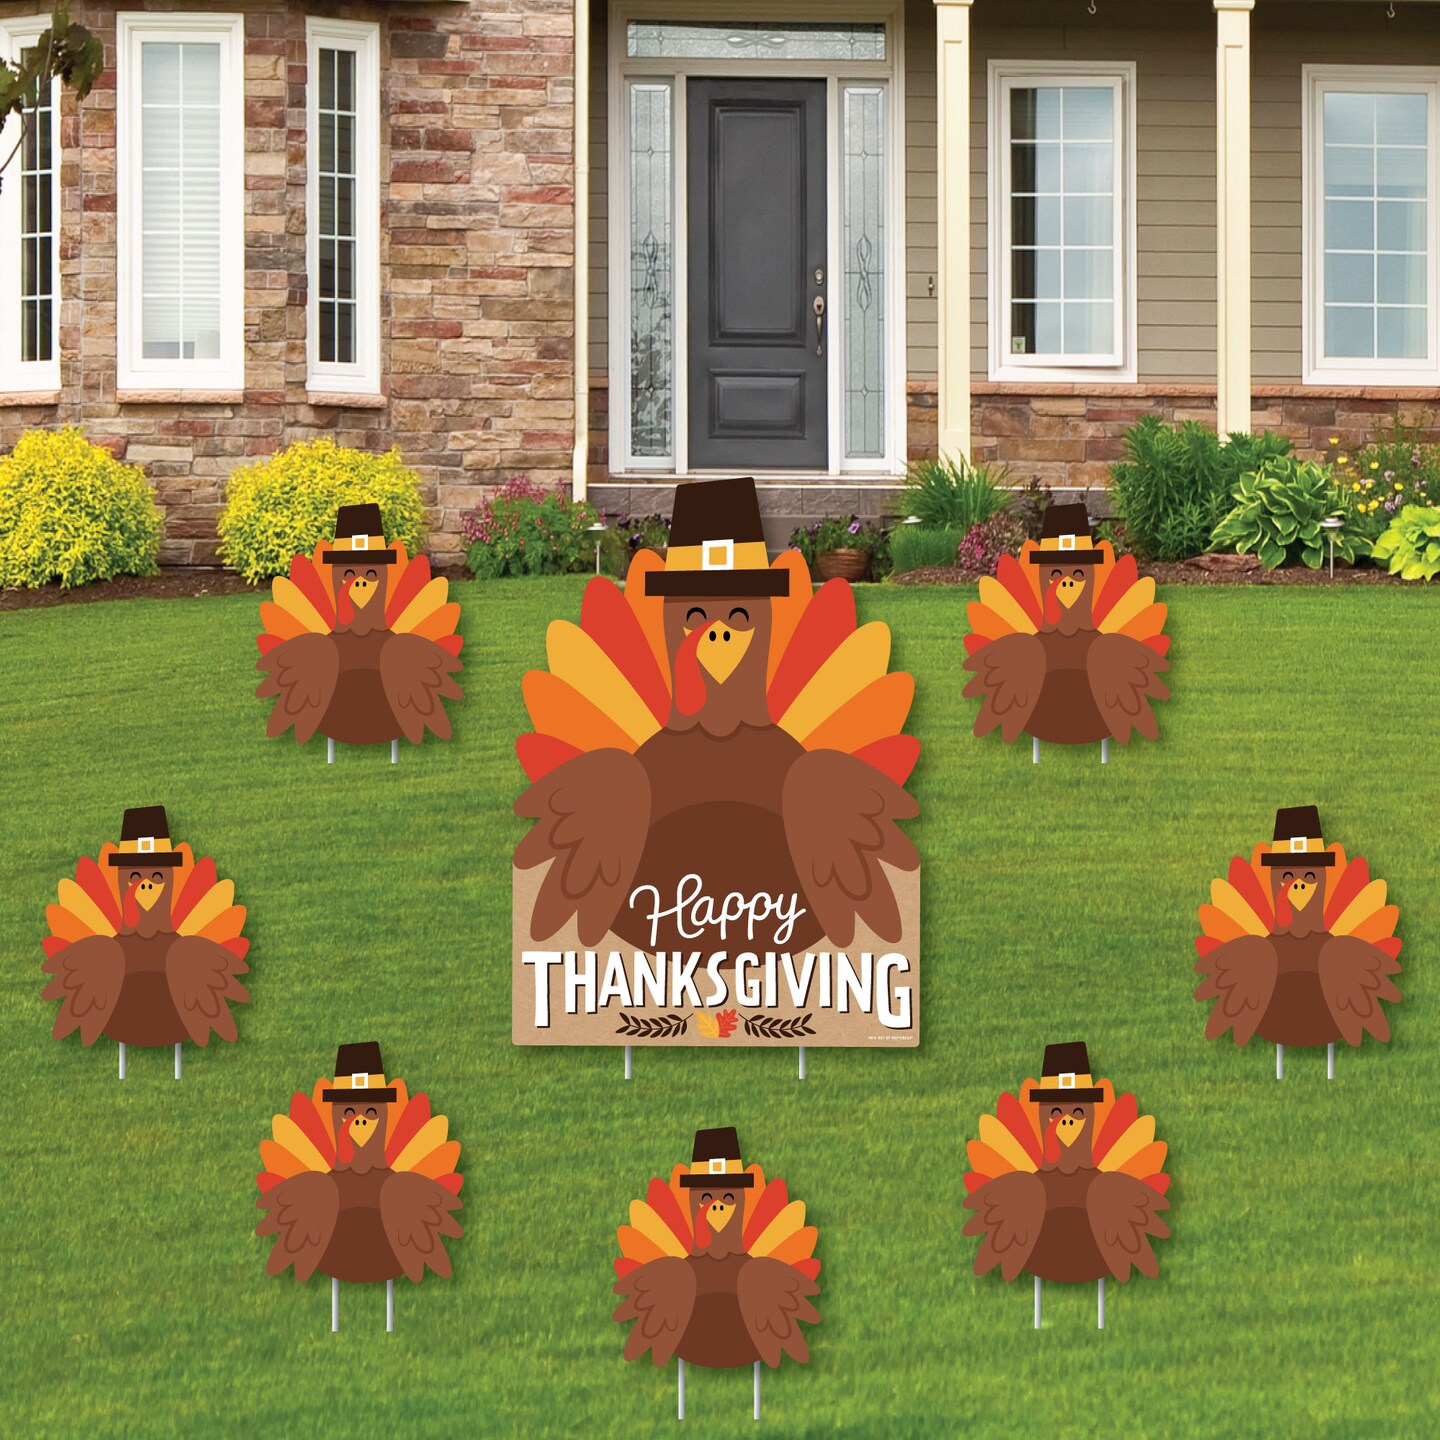 Big Dot of Happiness Fall Turkey - Yard Sign and Outdoor Lawn Decorations - Happy Thanksgiving Harvest Yard Signs - Set of 8